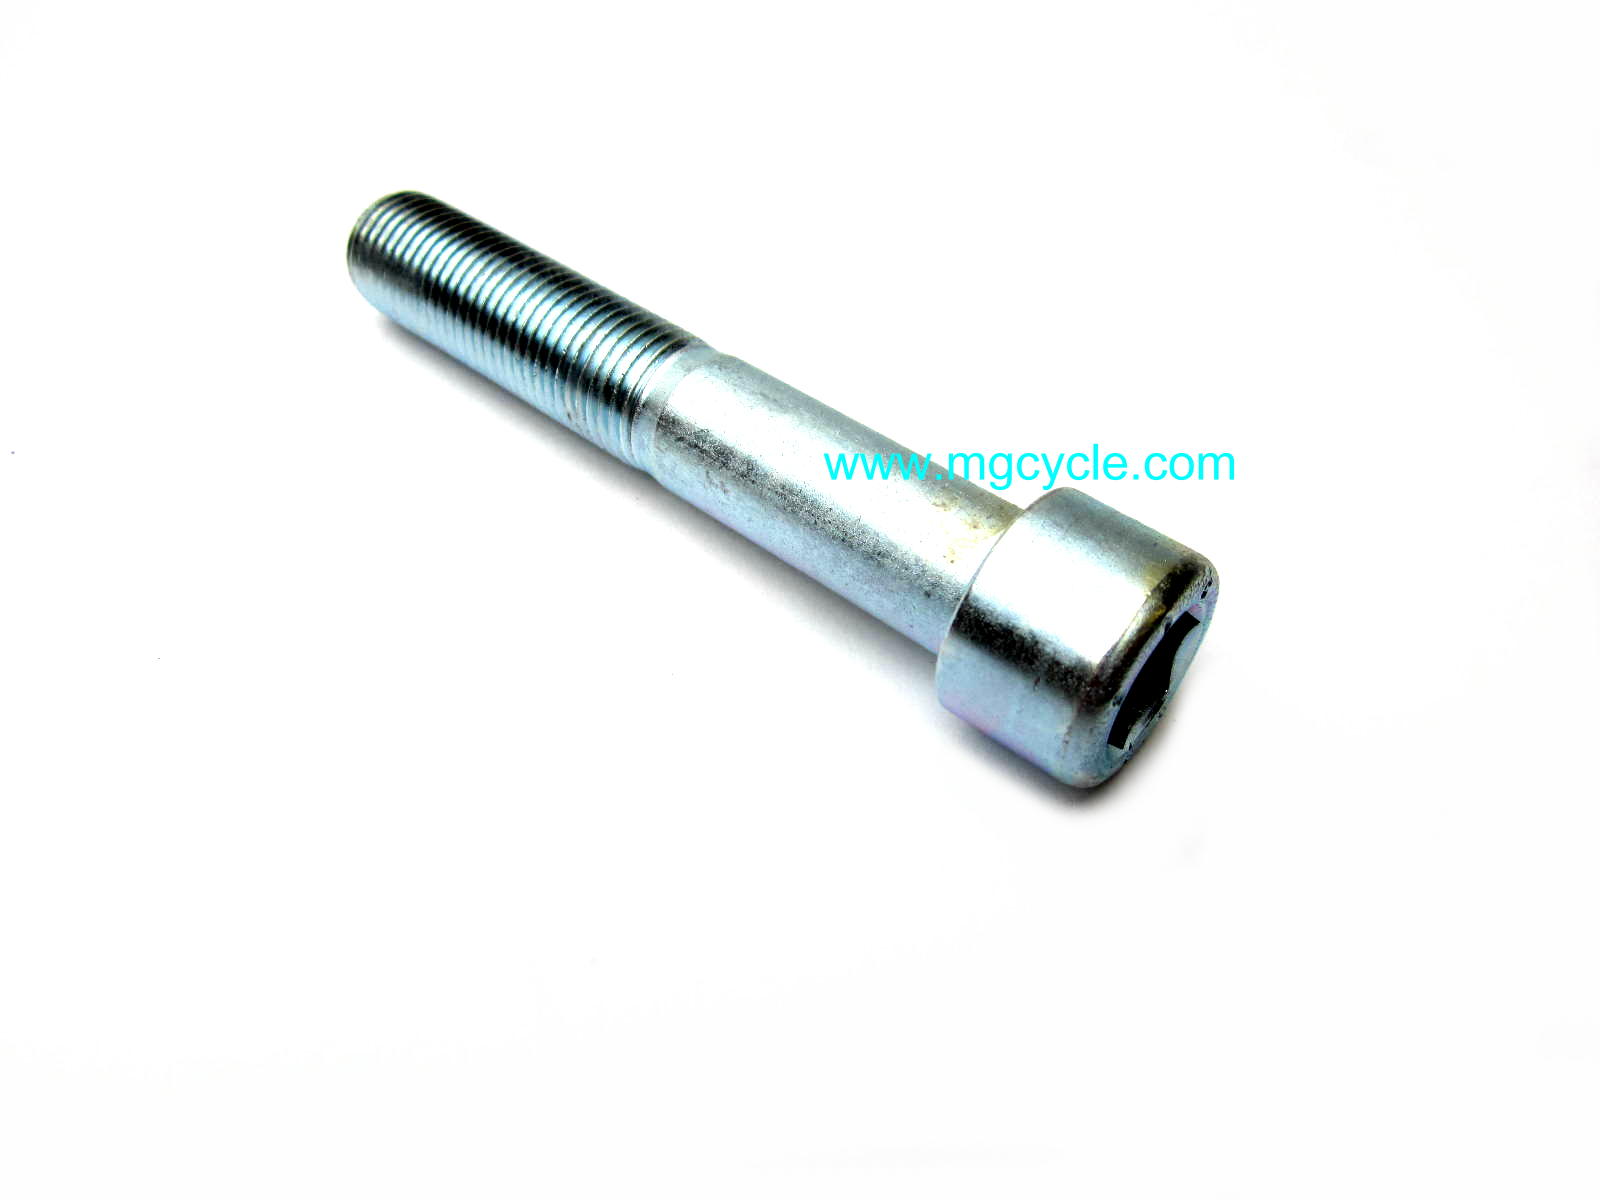 12mm x 70mm frame bolt, replaces 98621670